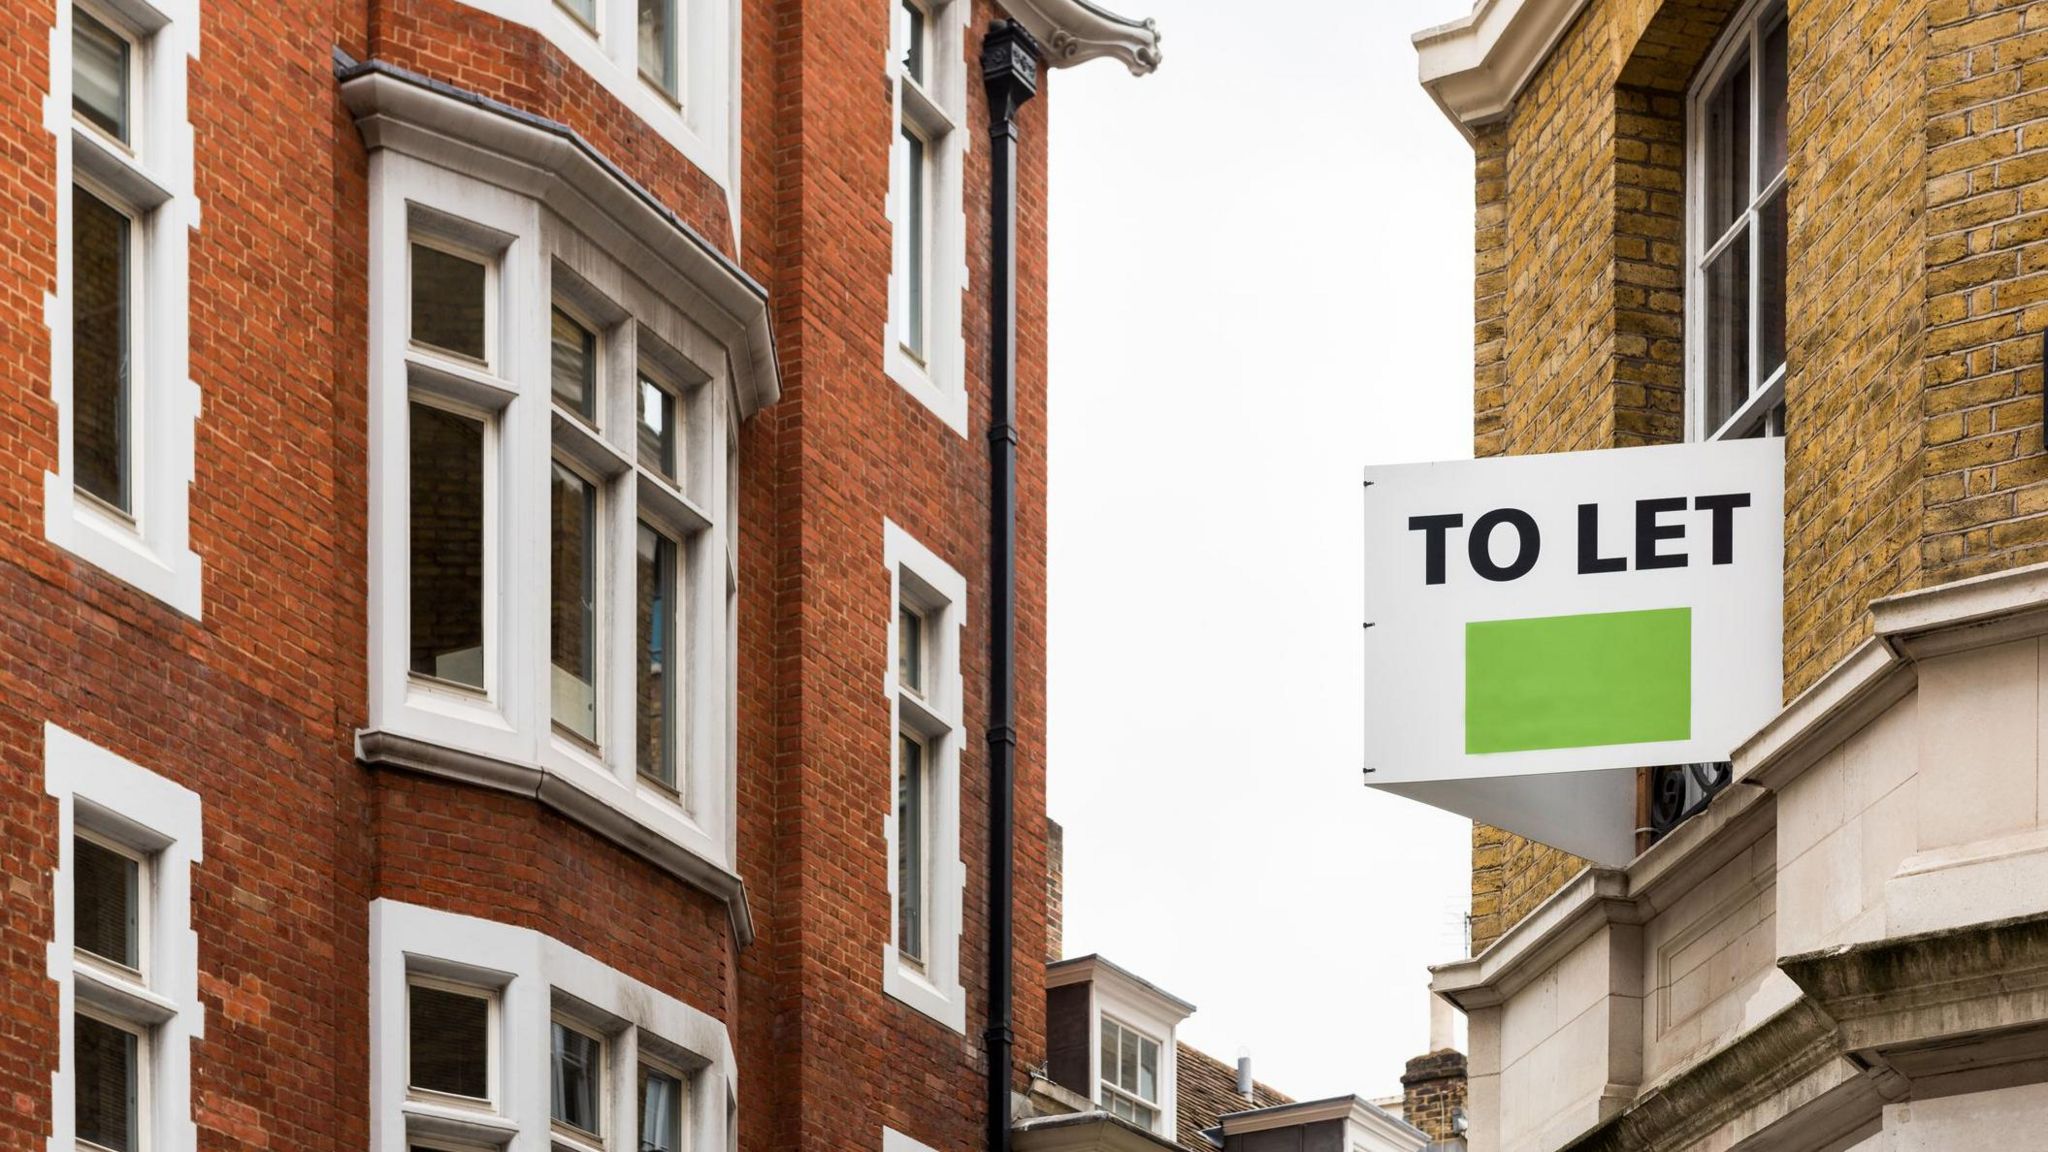 A "to let" sign on a property for rent in a London street.